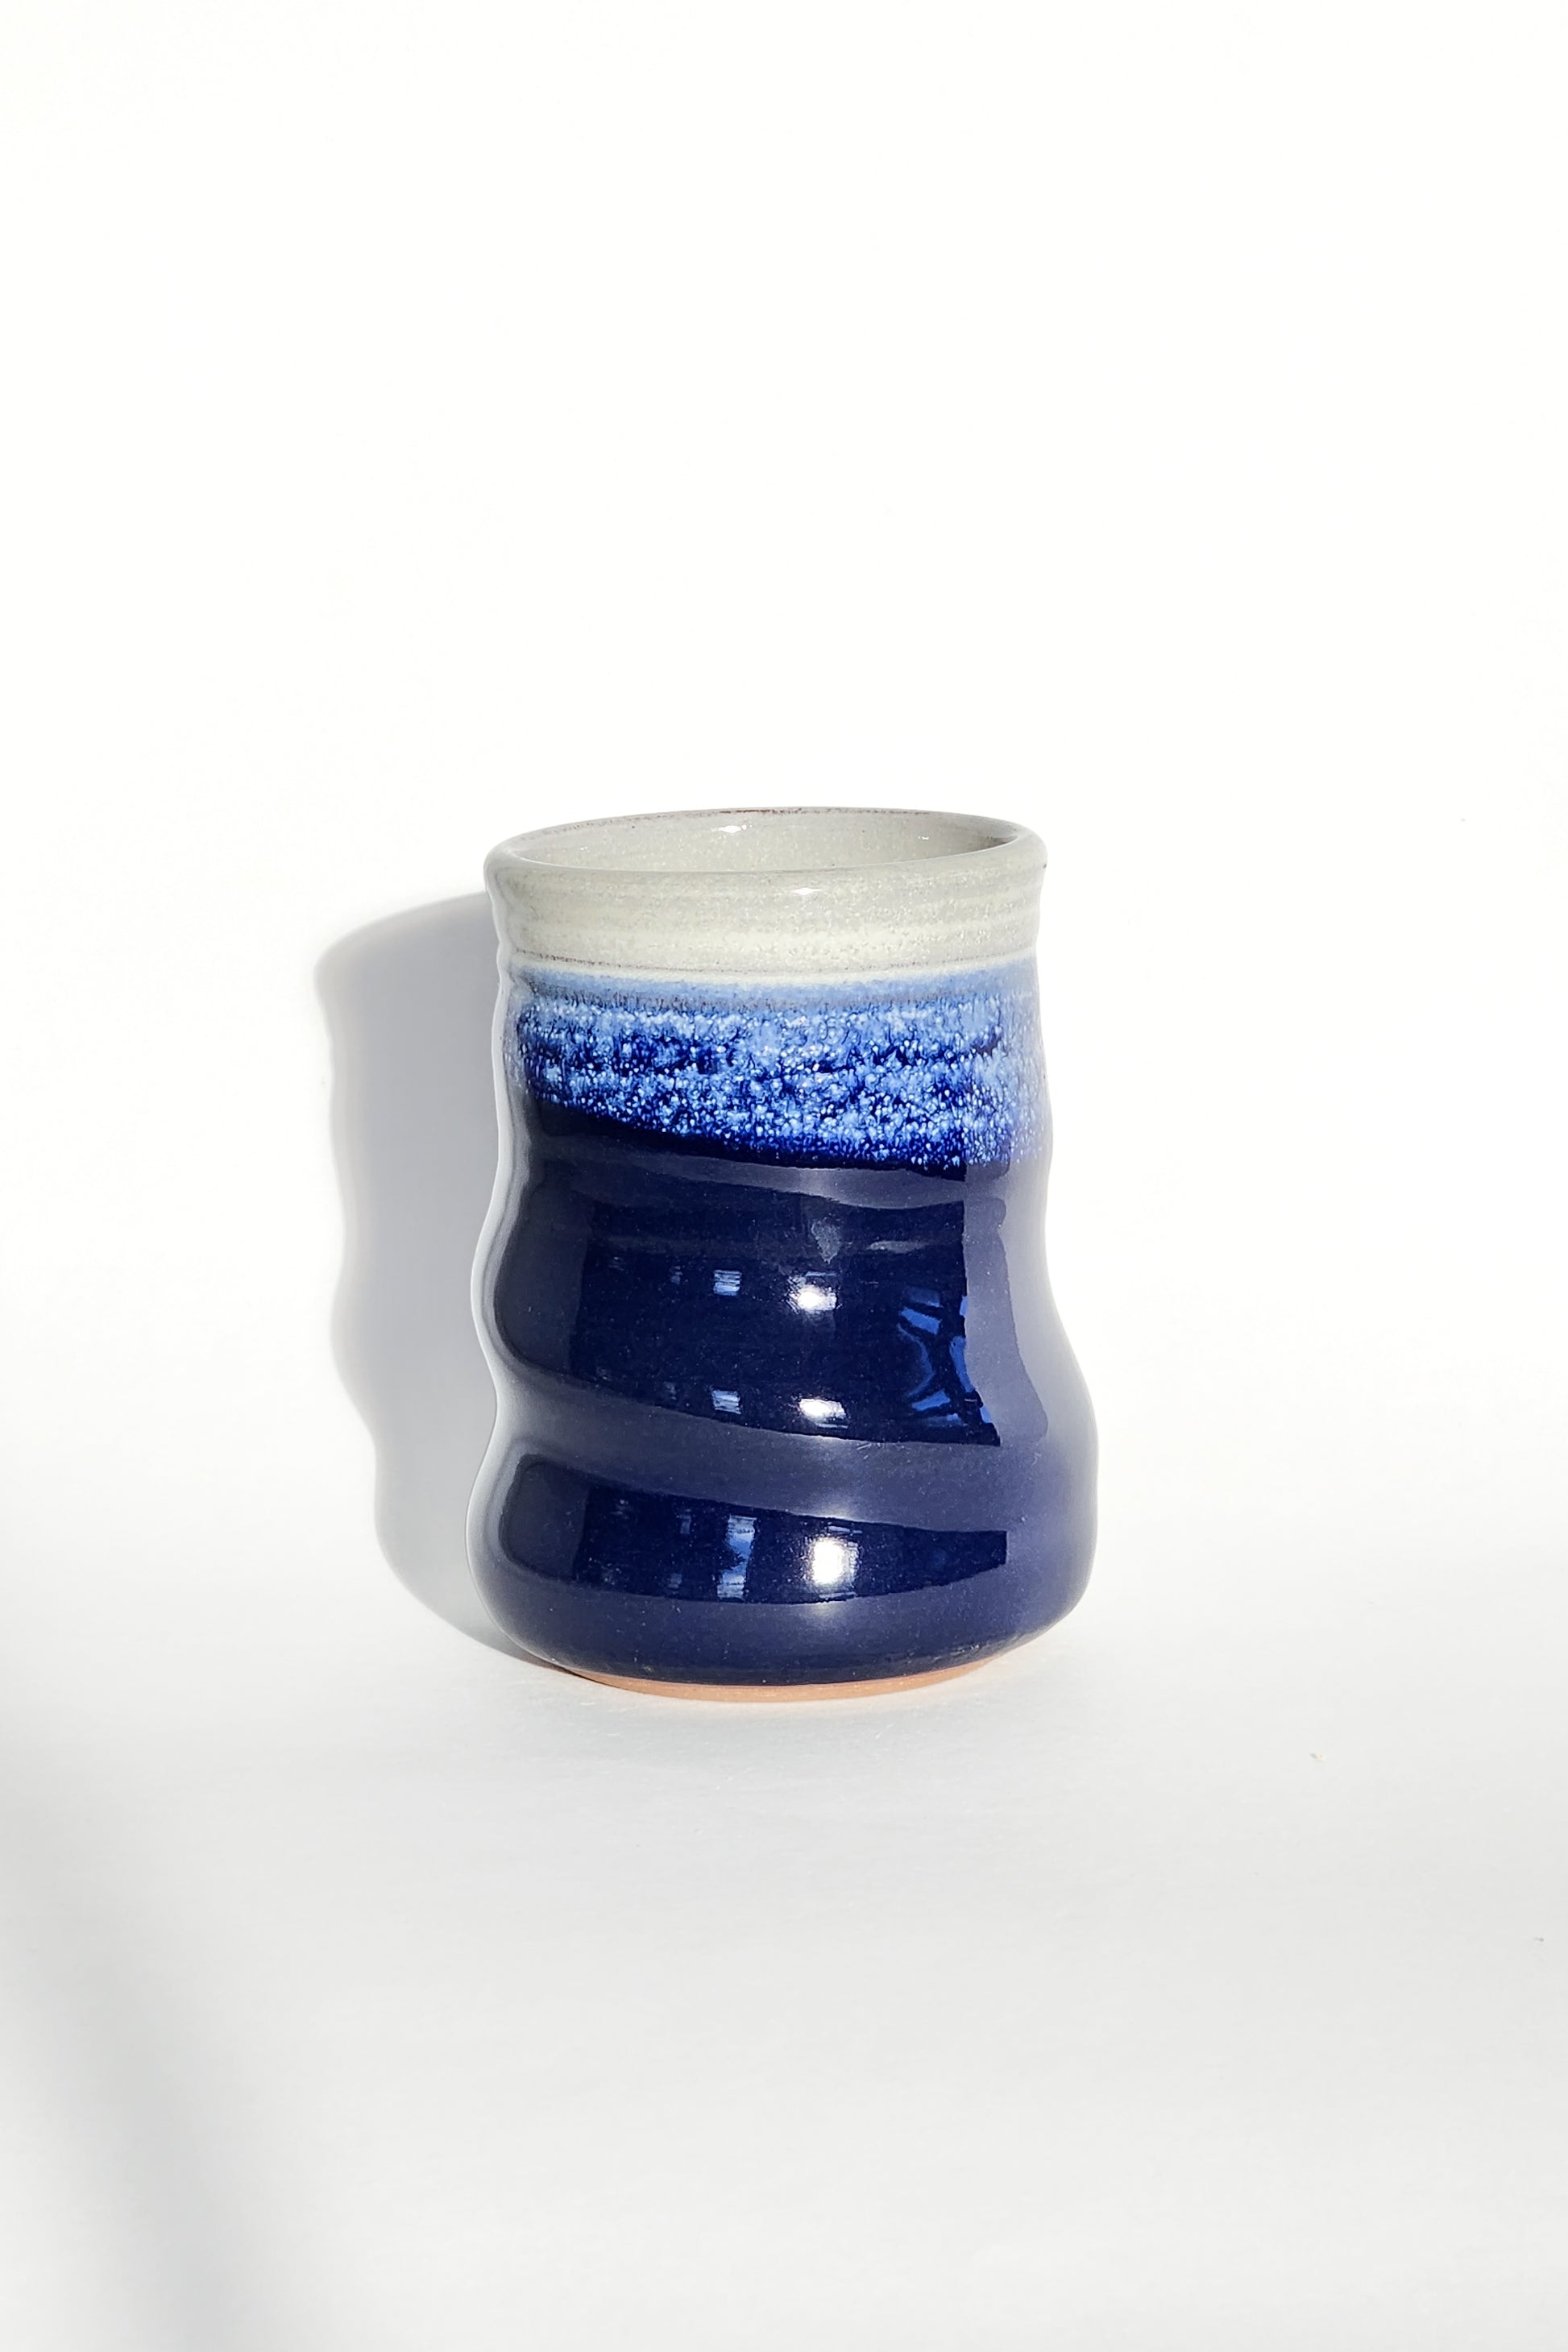 Image: Clinton Pottery's 15 oz Large Tumbler in Cobalt Blue – A visually striking addition with a cool, curvy design for a comfortable grip. This machine washable tumbler, crafted with care, adds contemporary elegance. The deep Cobalt Blue color brings richness, reminiscent of clear skies and ocean depths.